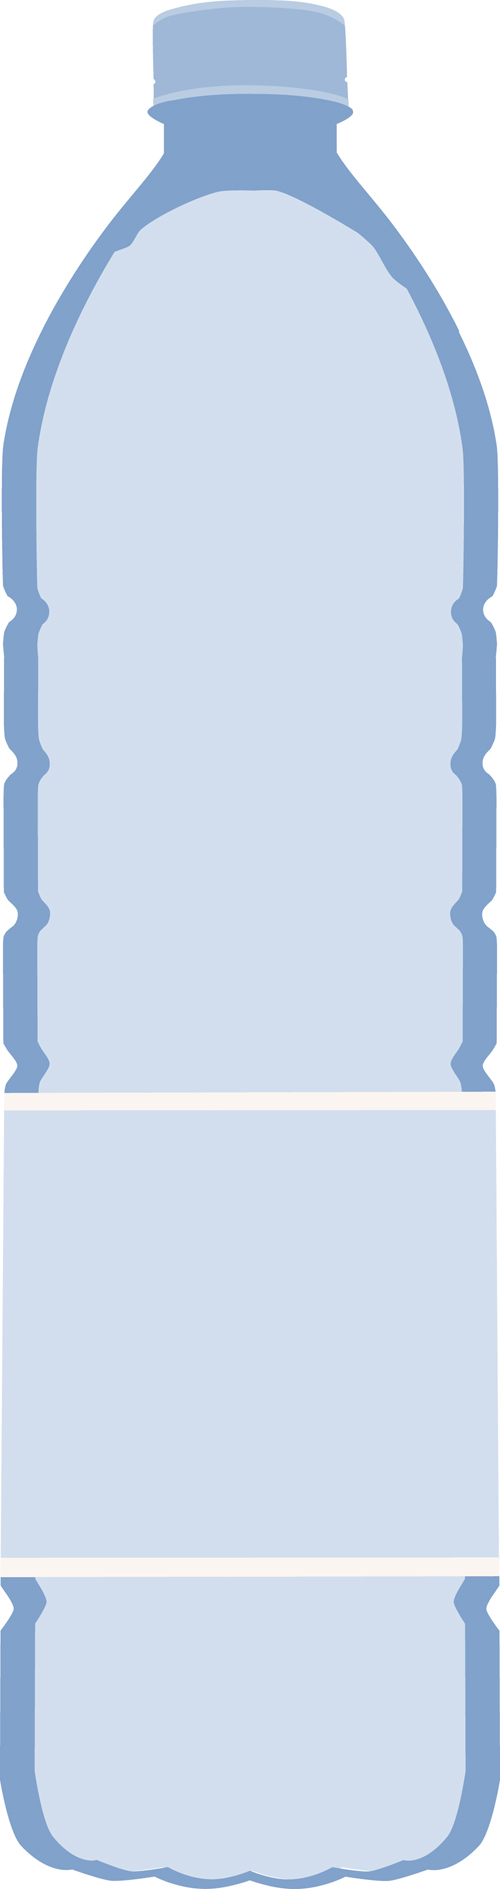 Free Water Bottle Template Printable